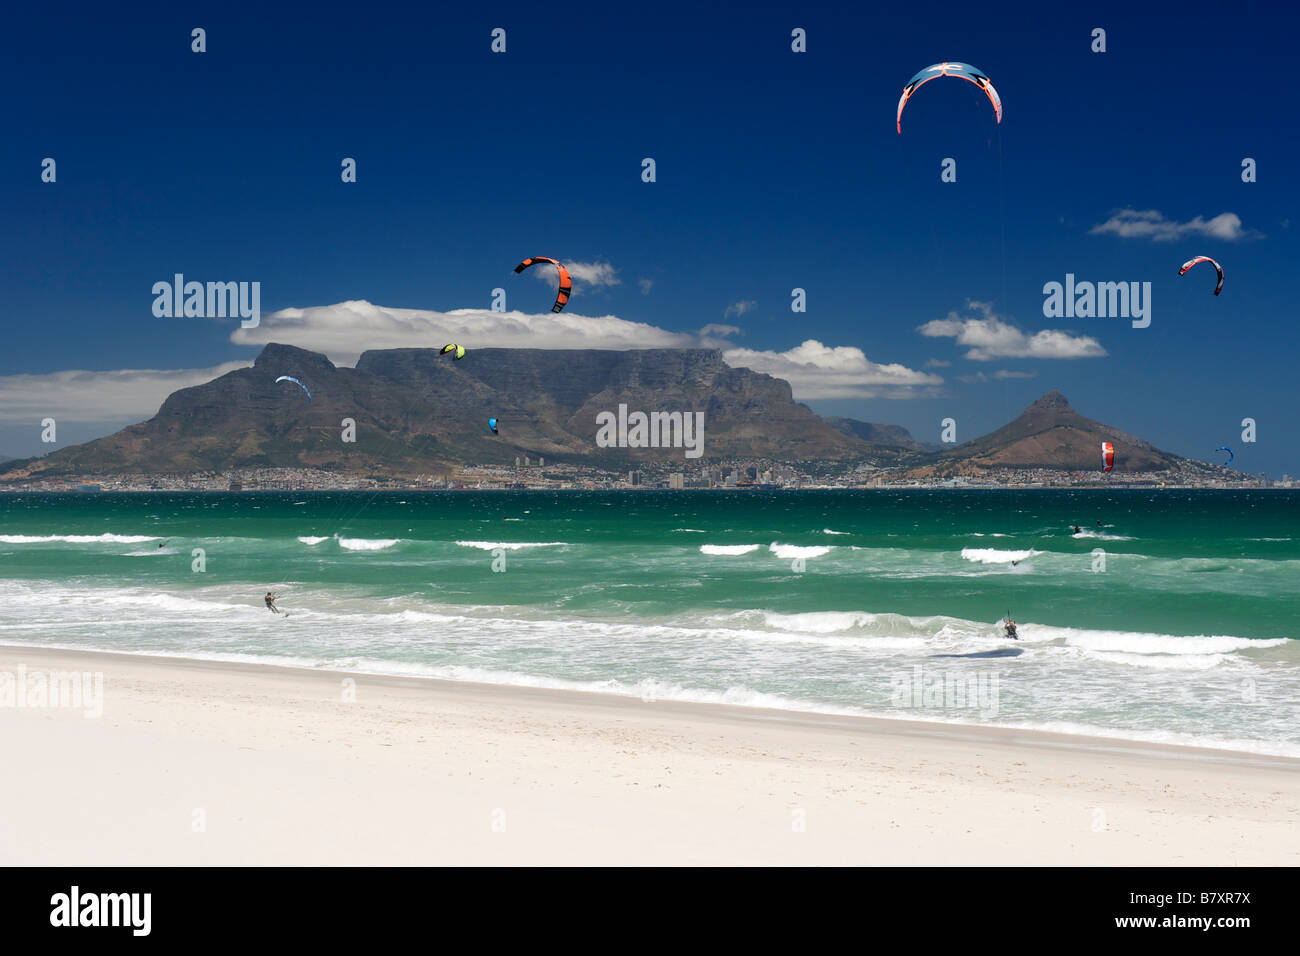 Kite-surfers at Blouberg Beach with a view of Table Mountain and the city of Cape Town visible across Table Bay. Stock Photo